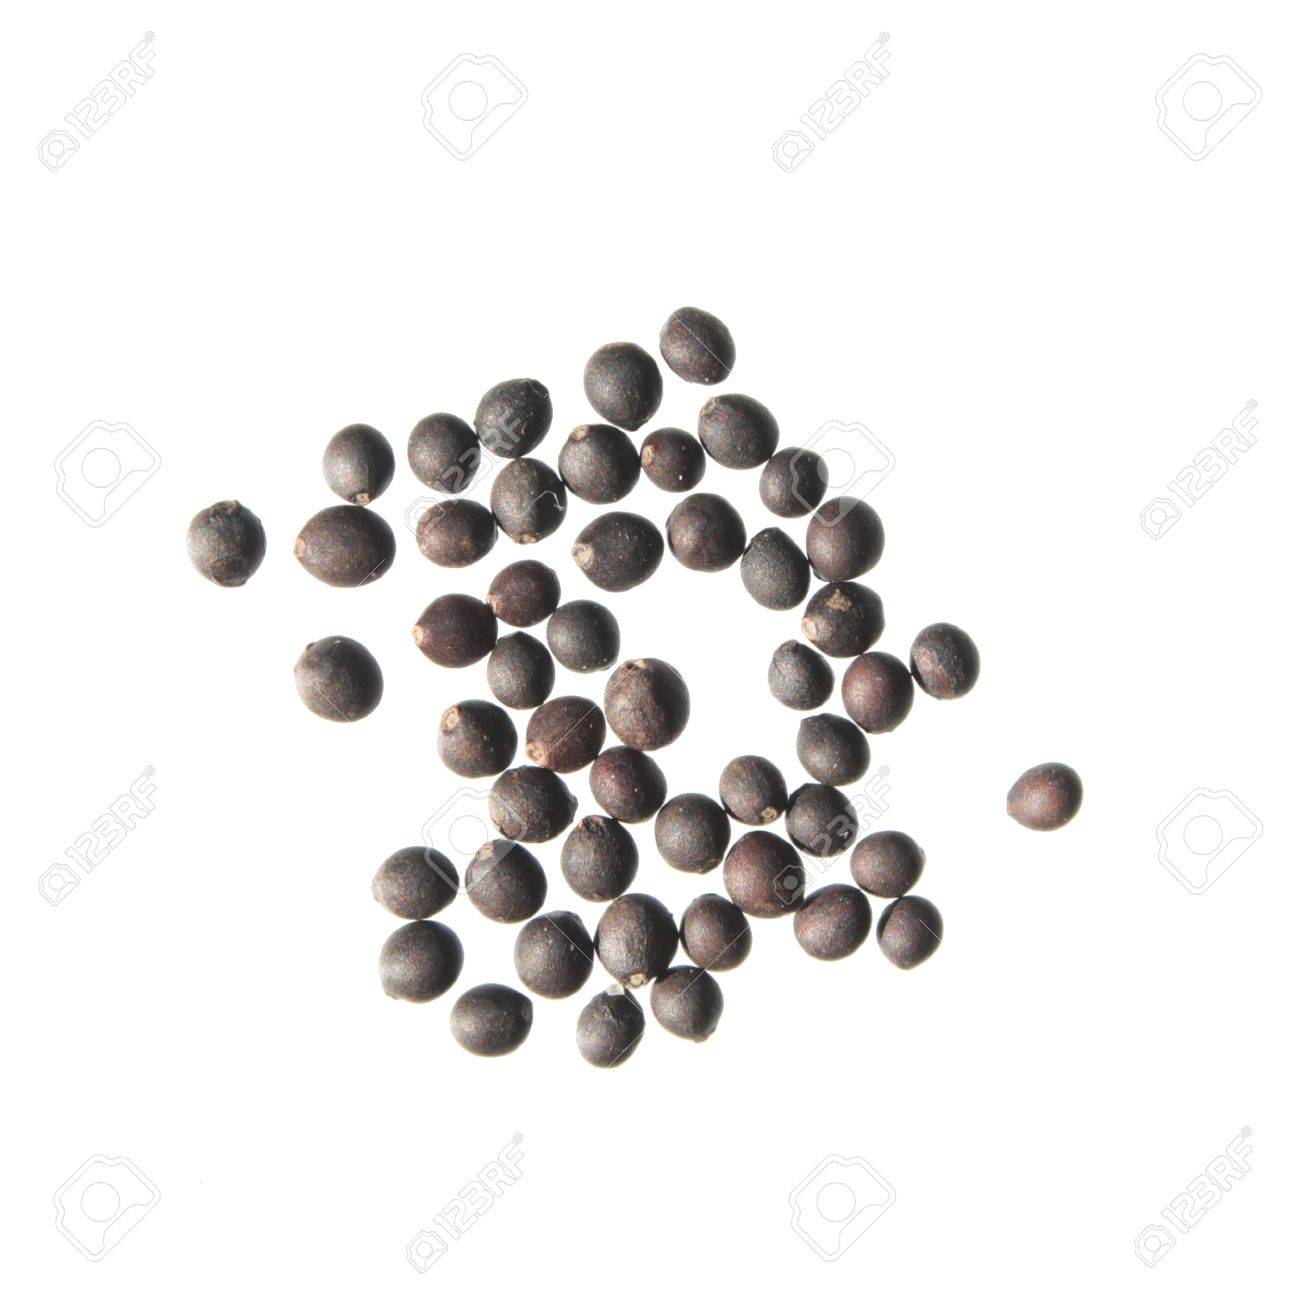 Seeds Of Sage Salvia Officinalis On White Background Stock Photo